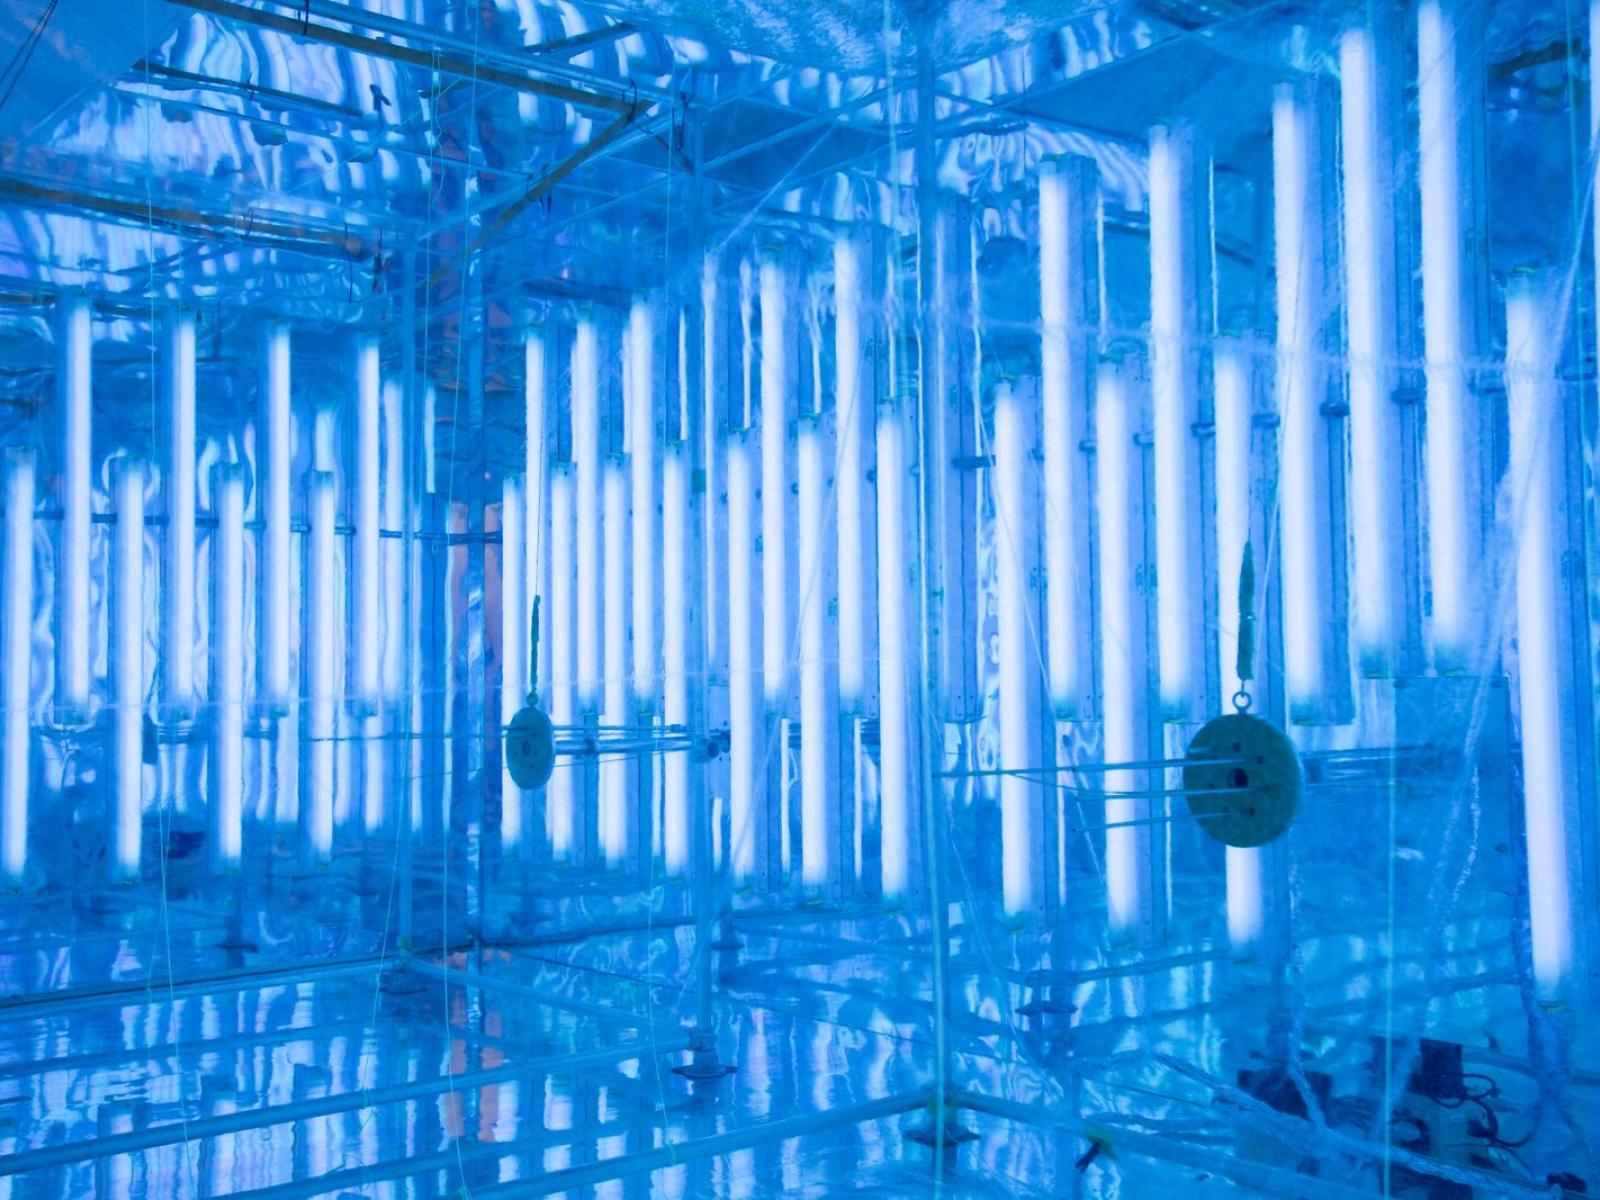 Inside of aerosol chamber with cool looking blue lights